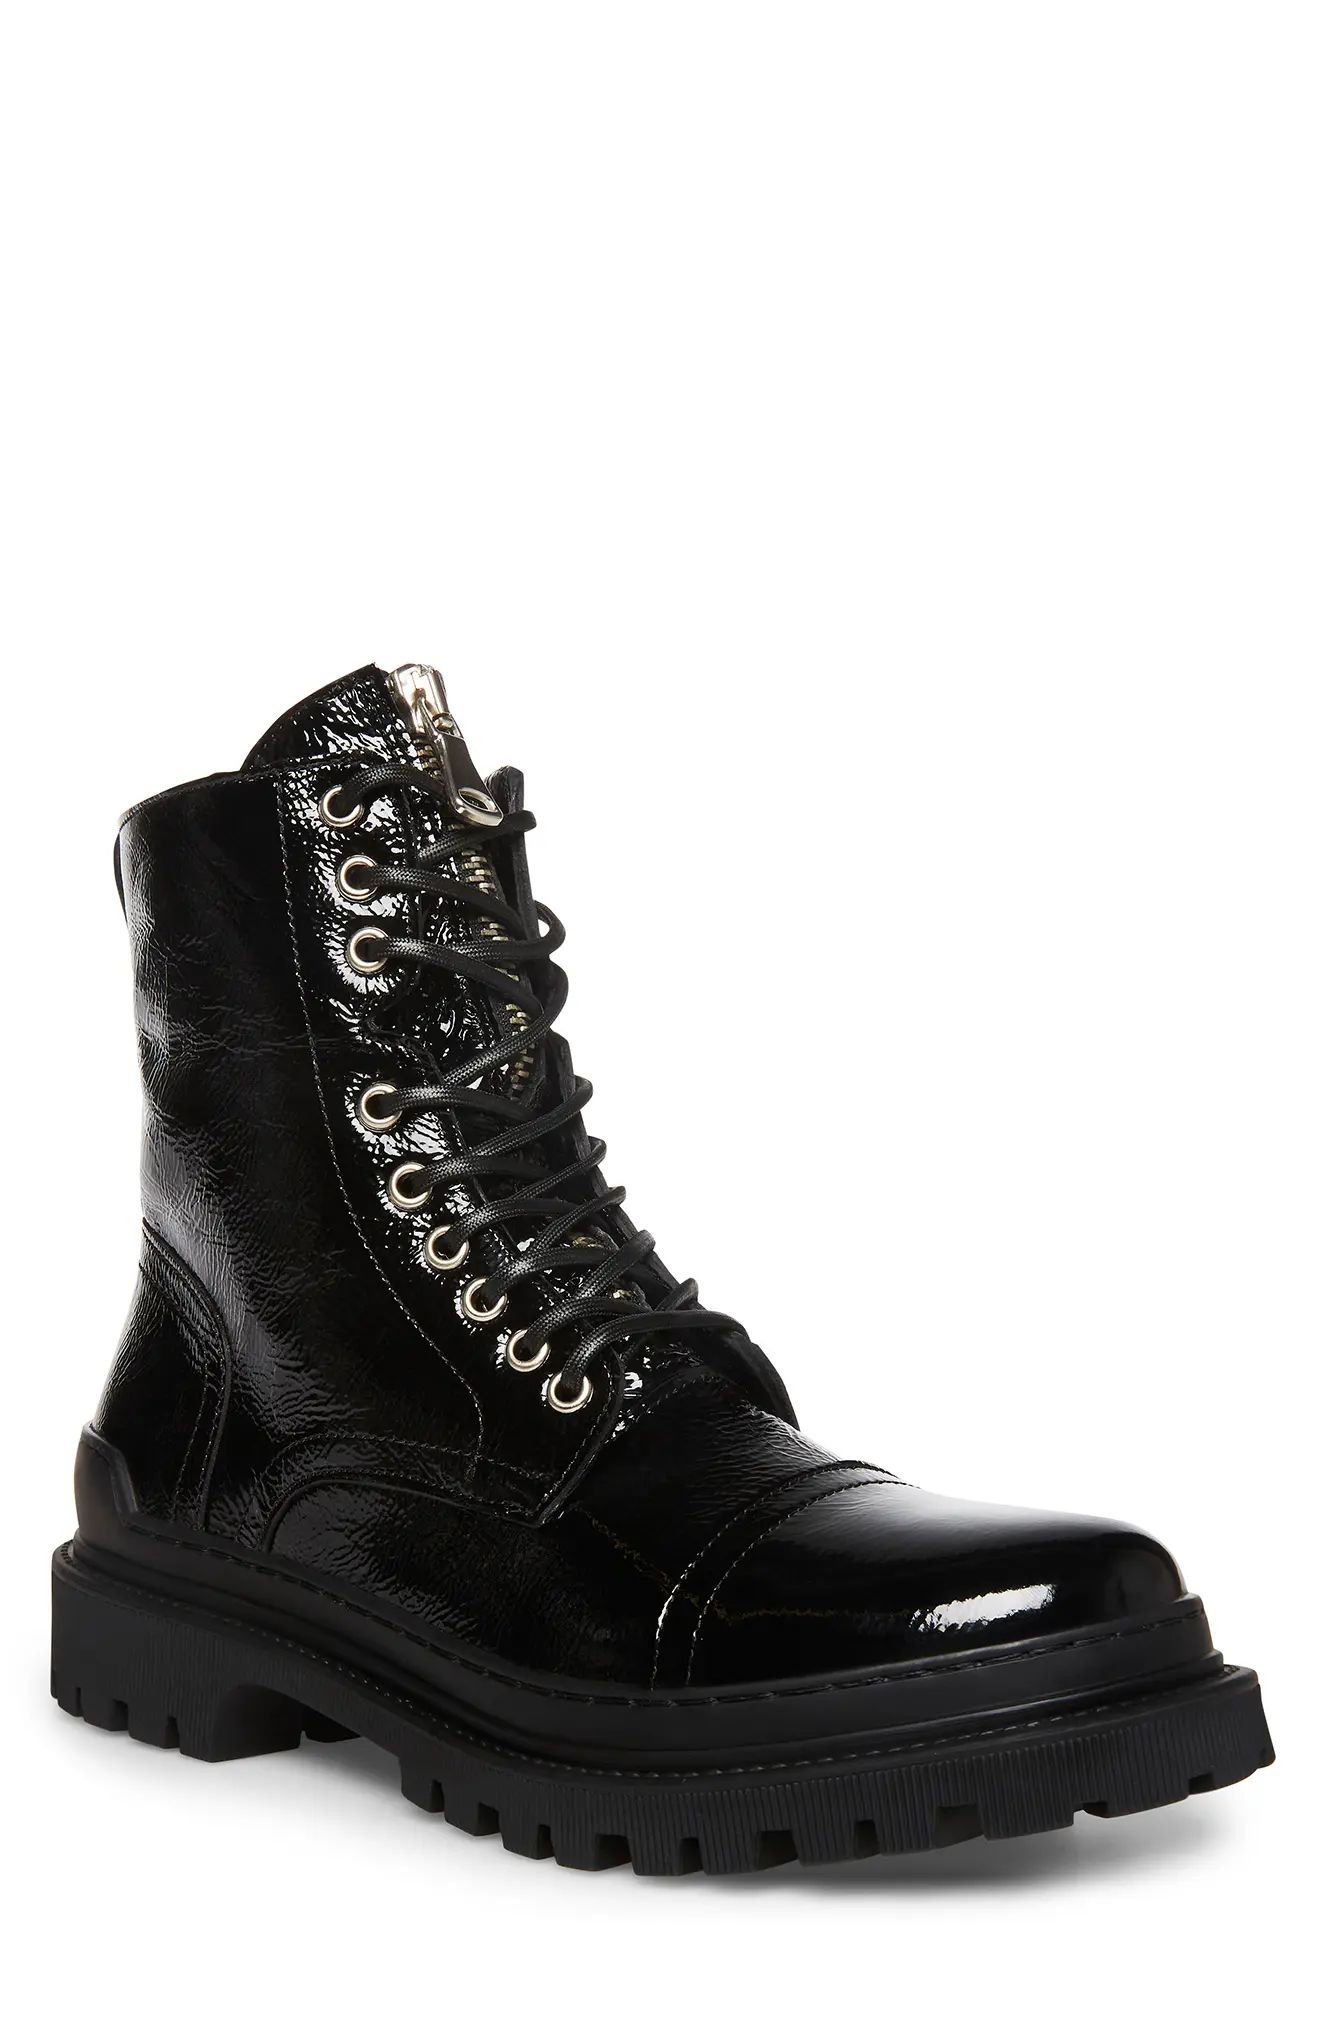 Steve Madden Guard Patent Leather Combat Boot in Black at Nordstrom, Size 10.5 | Nordstrom